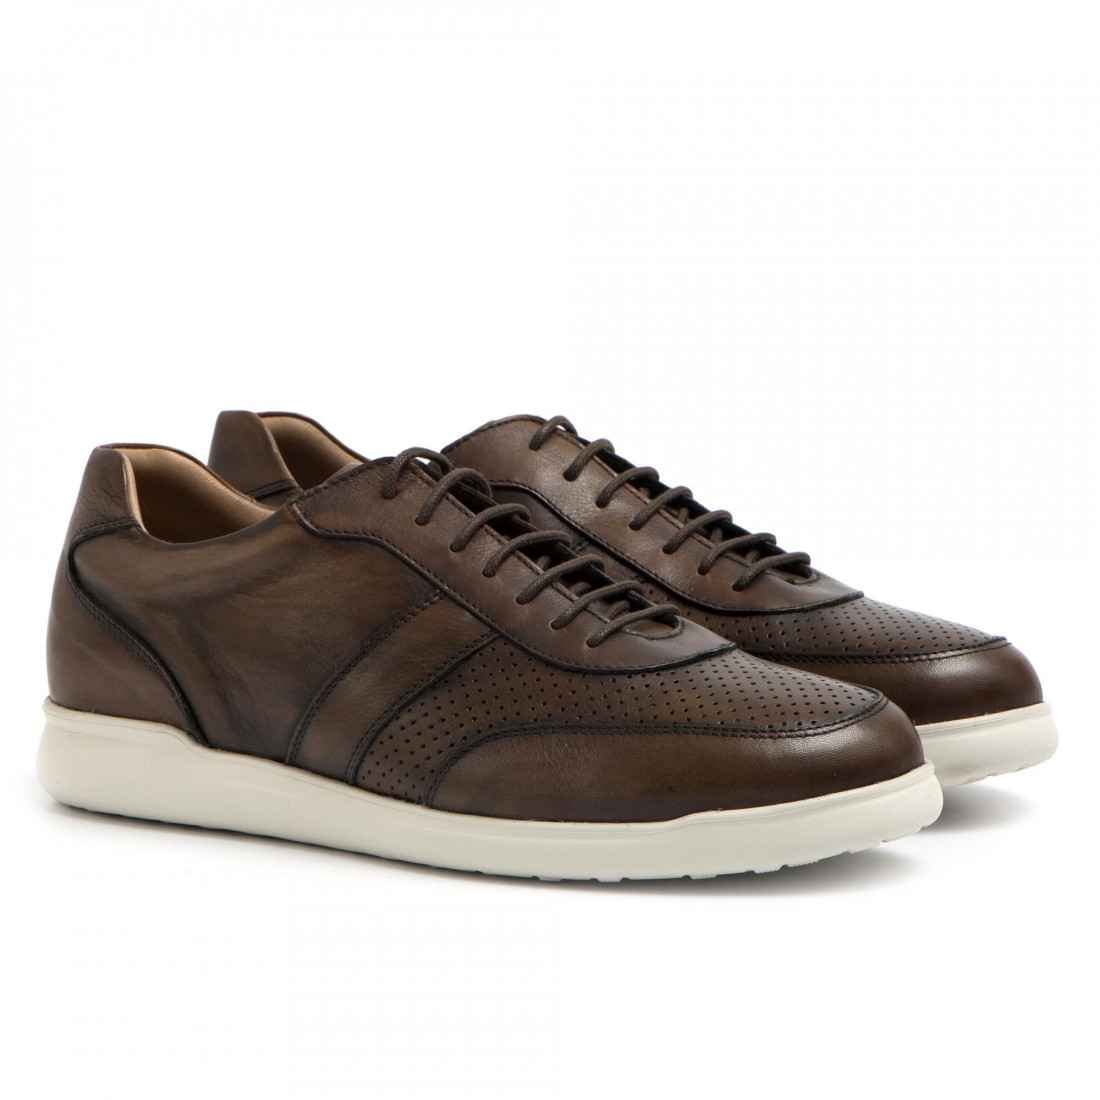 Brown perforated leather Calpierre sneakers